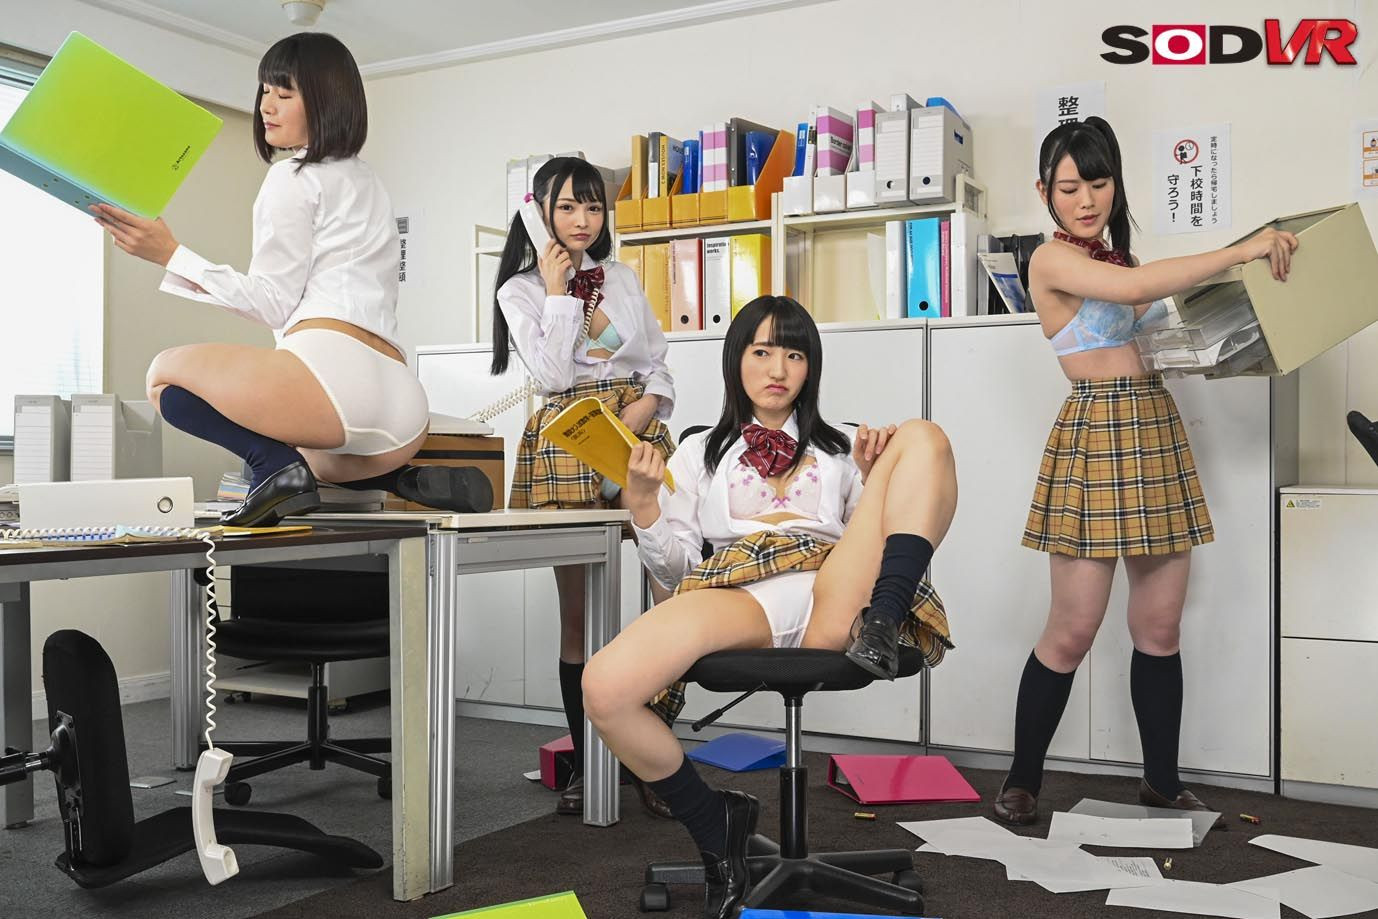 For True Masochists: The Roles are Reversed and 4 Slutty Schoolgirls Gang up and Fuck You; Dominated by Japanese Teen JAV Idols Slideshow